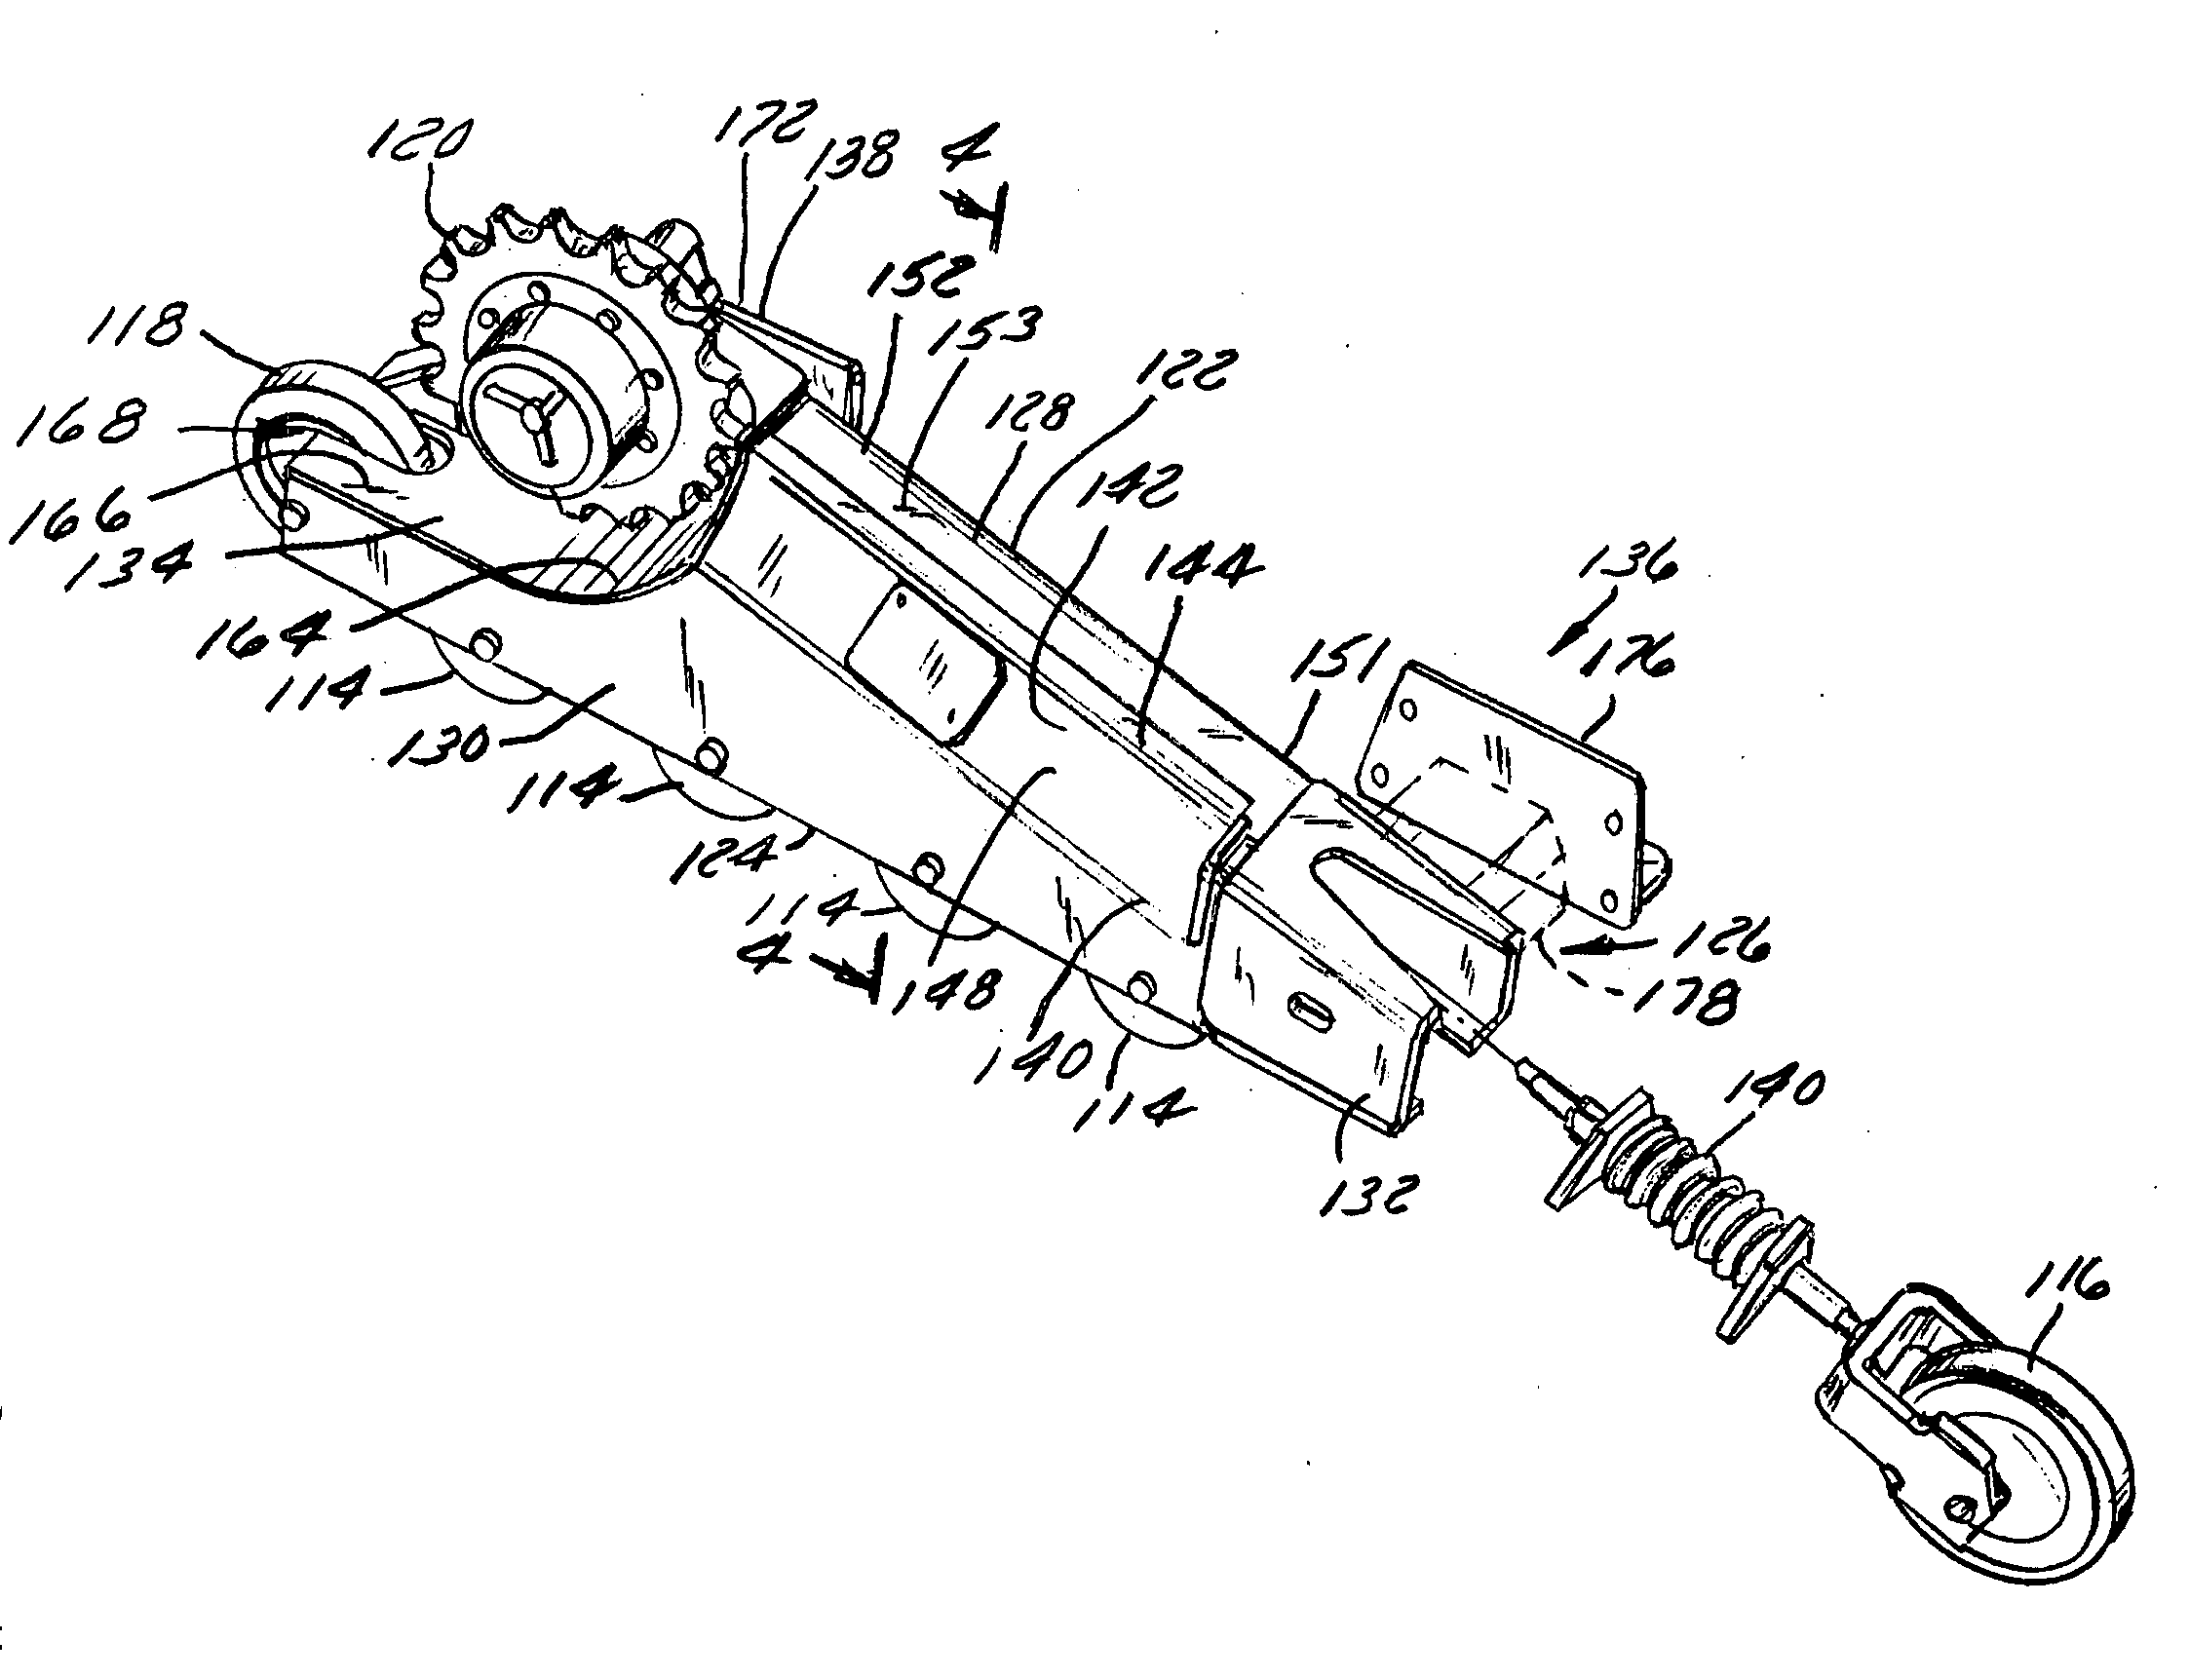 Tracked suspension beam assembly